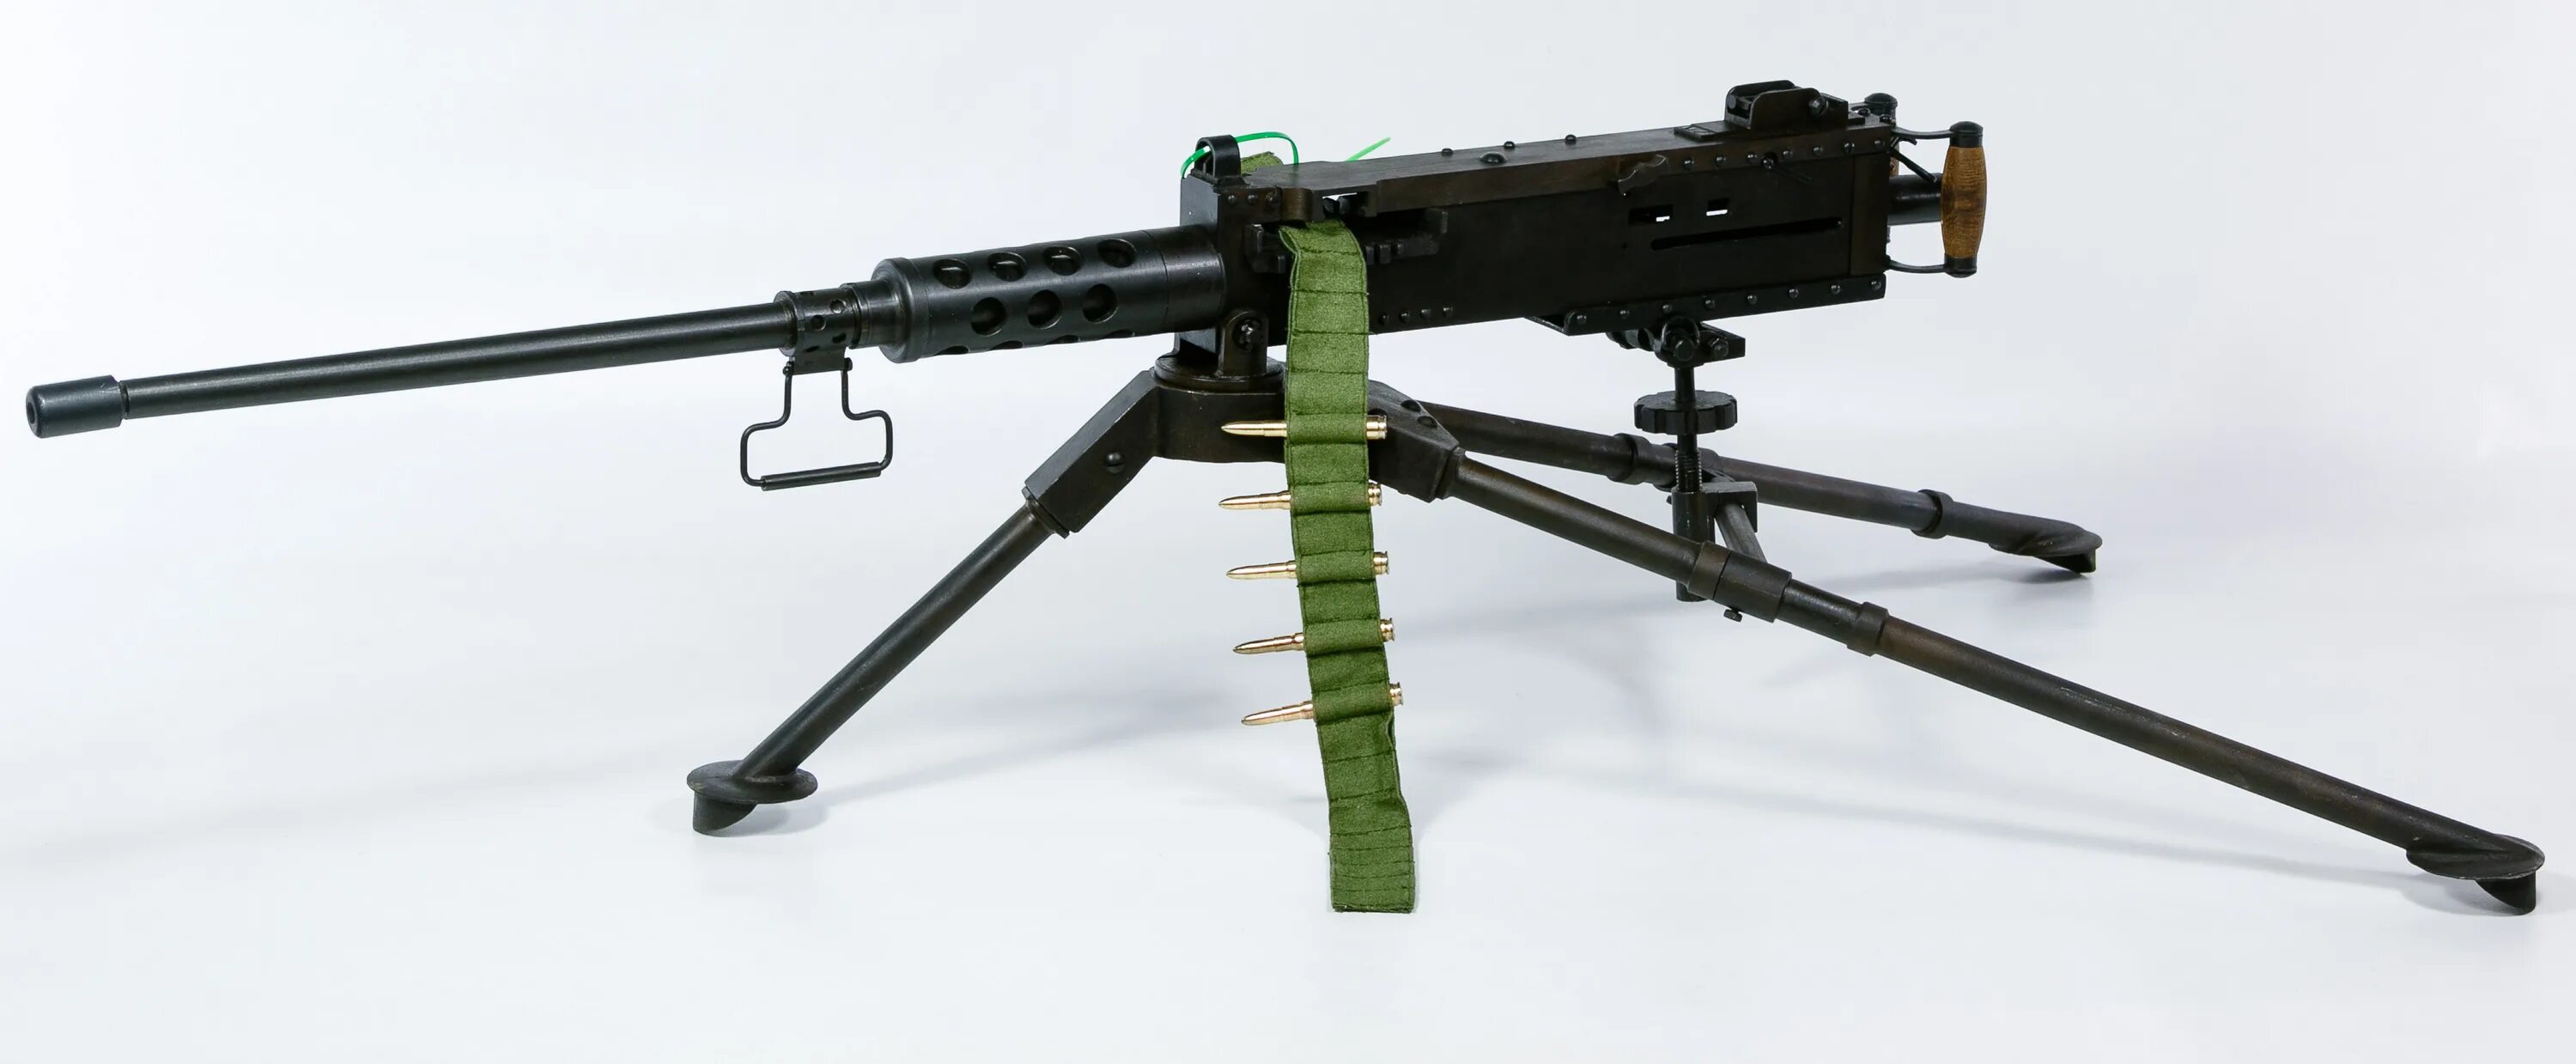 50 browning. M2 Browning калибра 50. Пулемёт Browning m2 cal .50 12.7 мм. Пулемёт Browning m2. Пулемёт Браунинг 50 калибра.